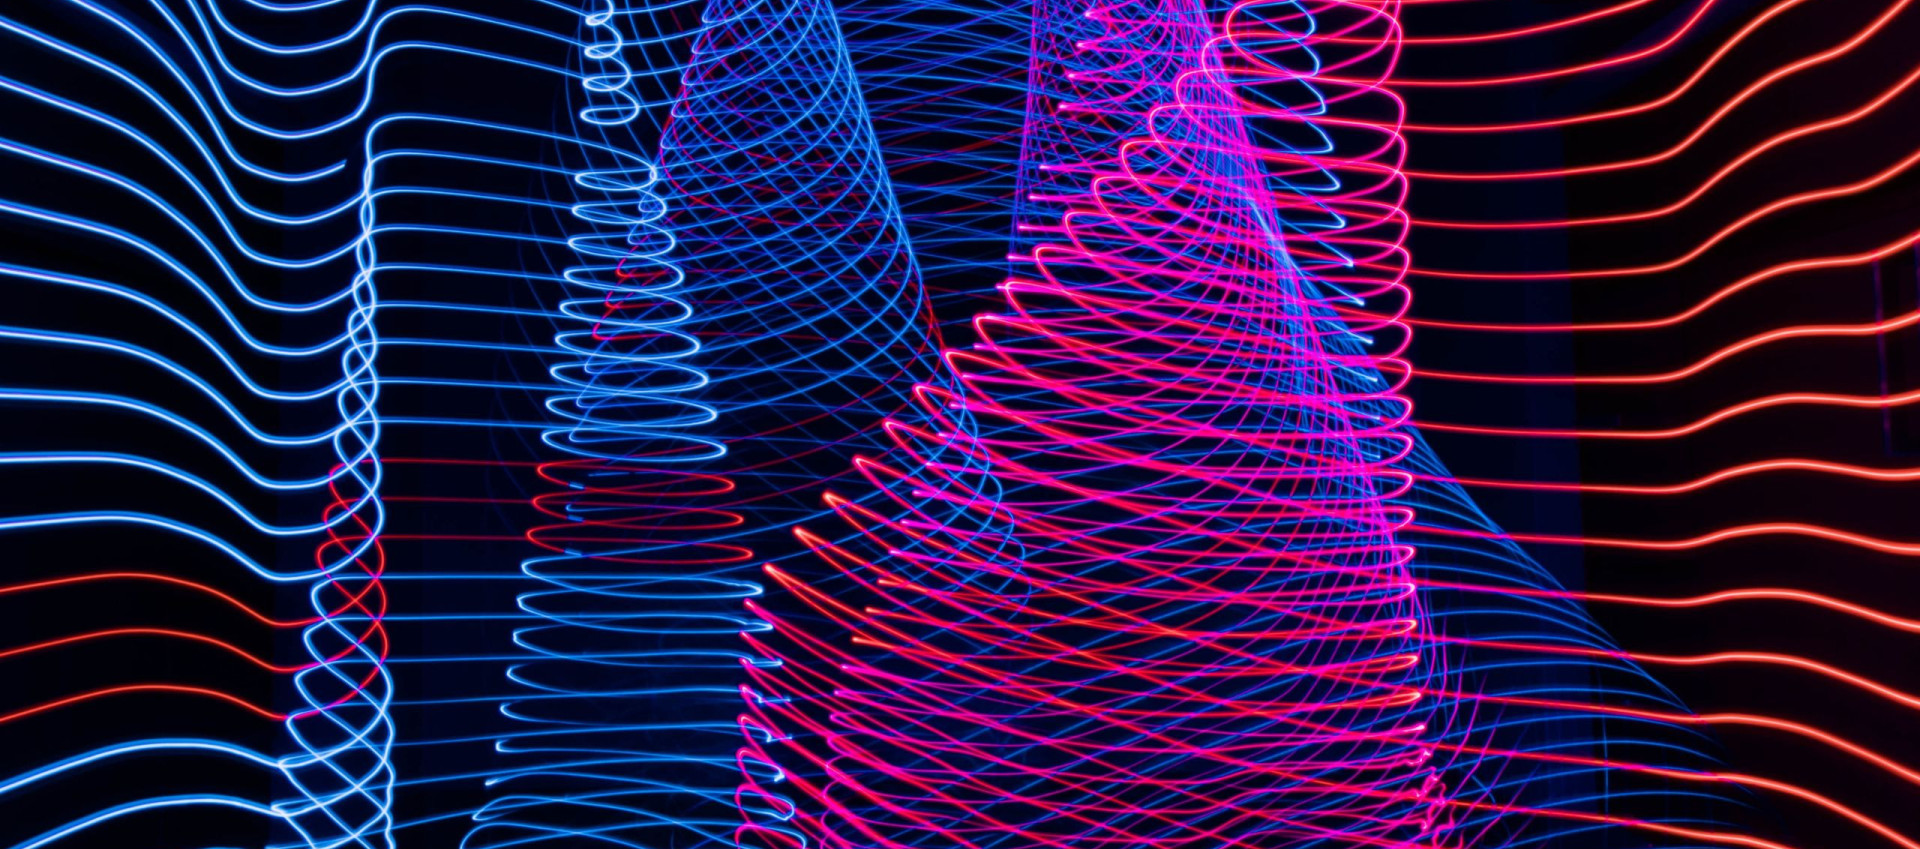 A striking light painting showcasing a blend of blue and red colors on a contrasting black background.